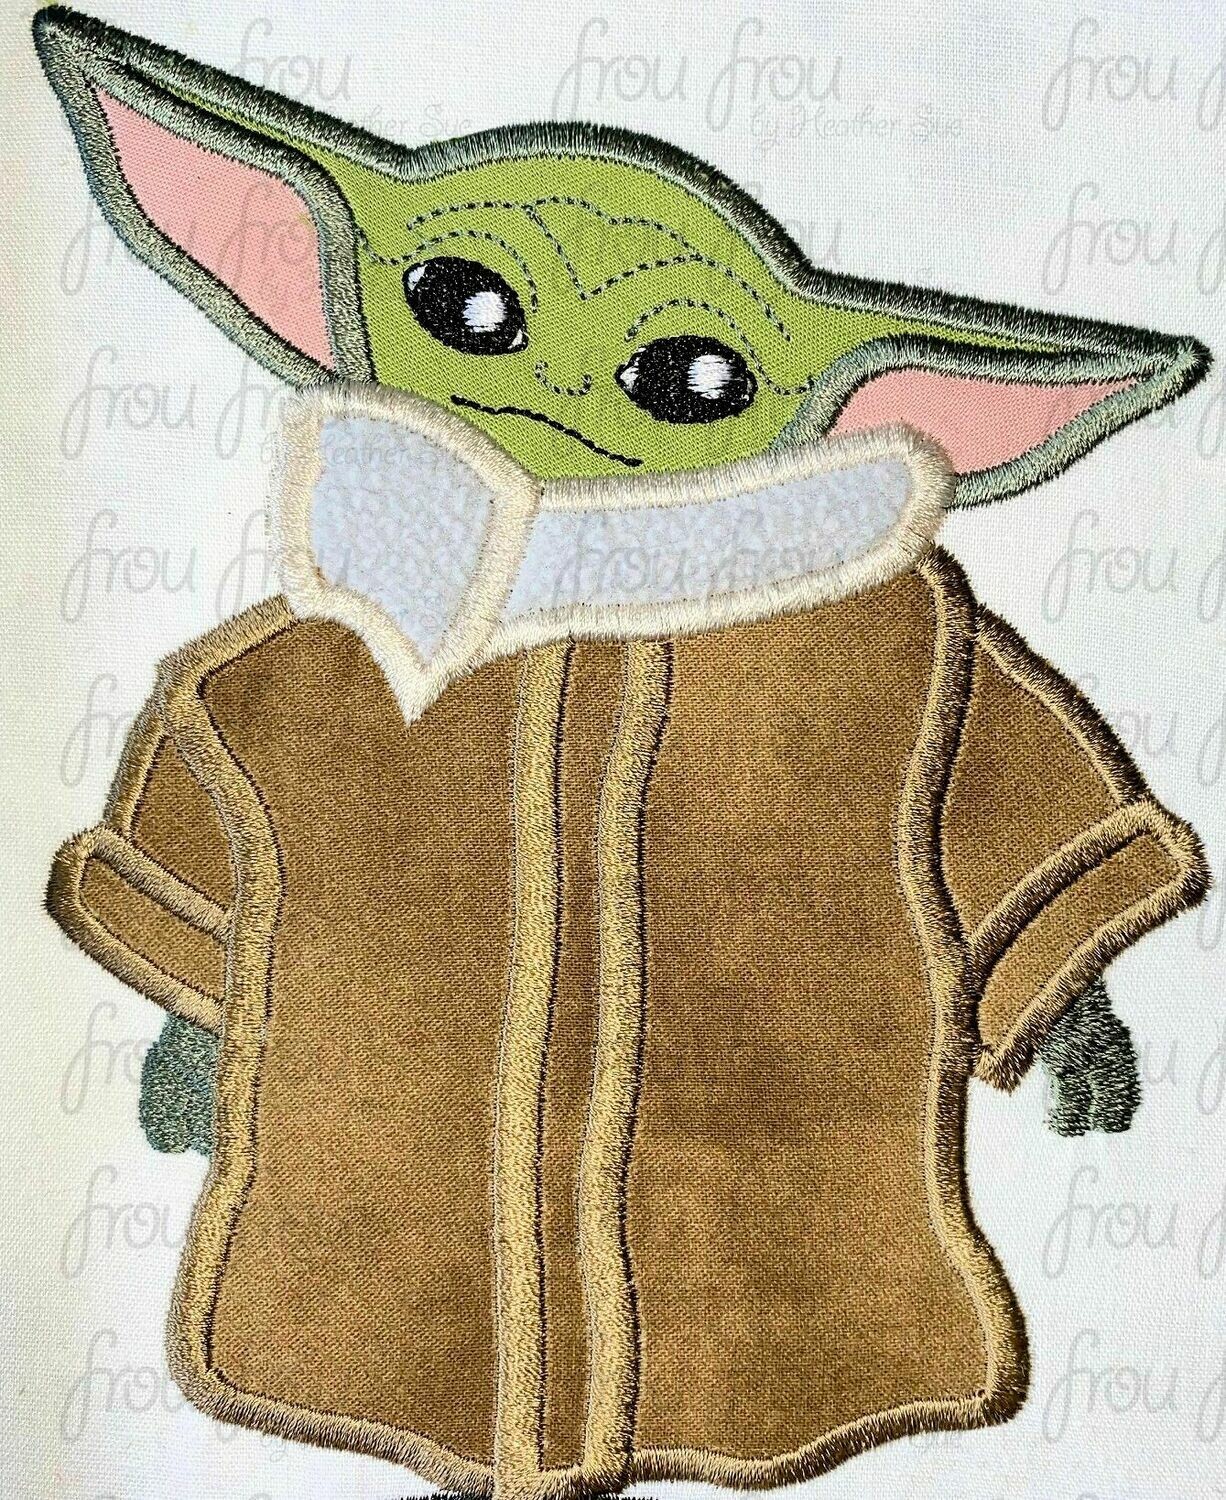 Grogurt Baby Yoduh Child Space Wars Machine Applique and filled Embroidery Design Multiple Sizes, including 2"-16"